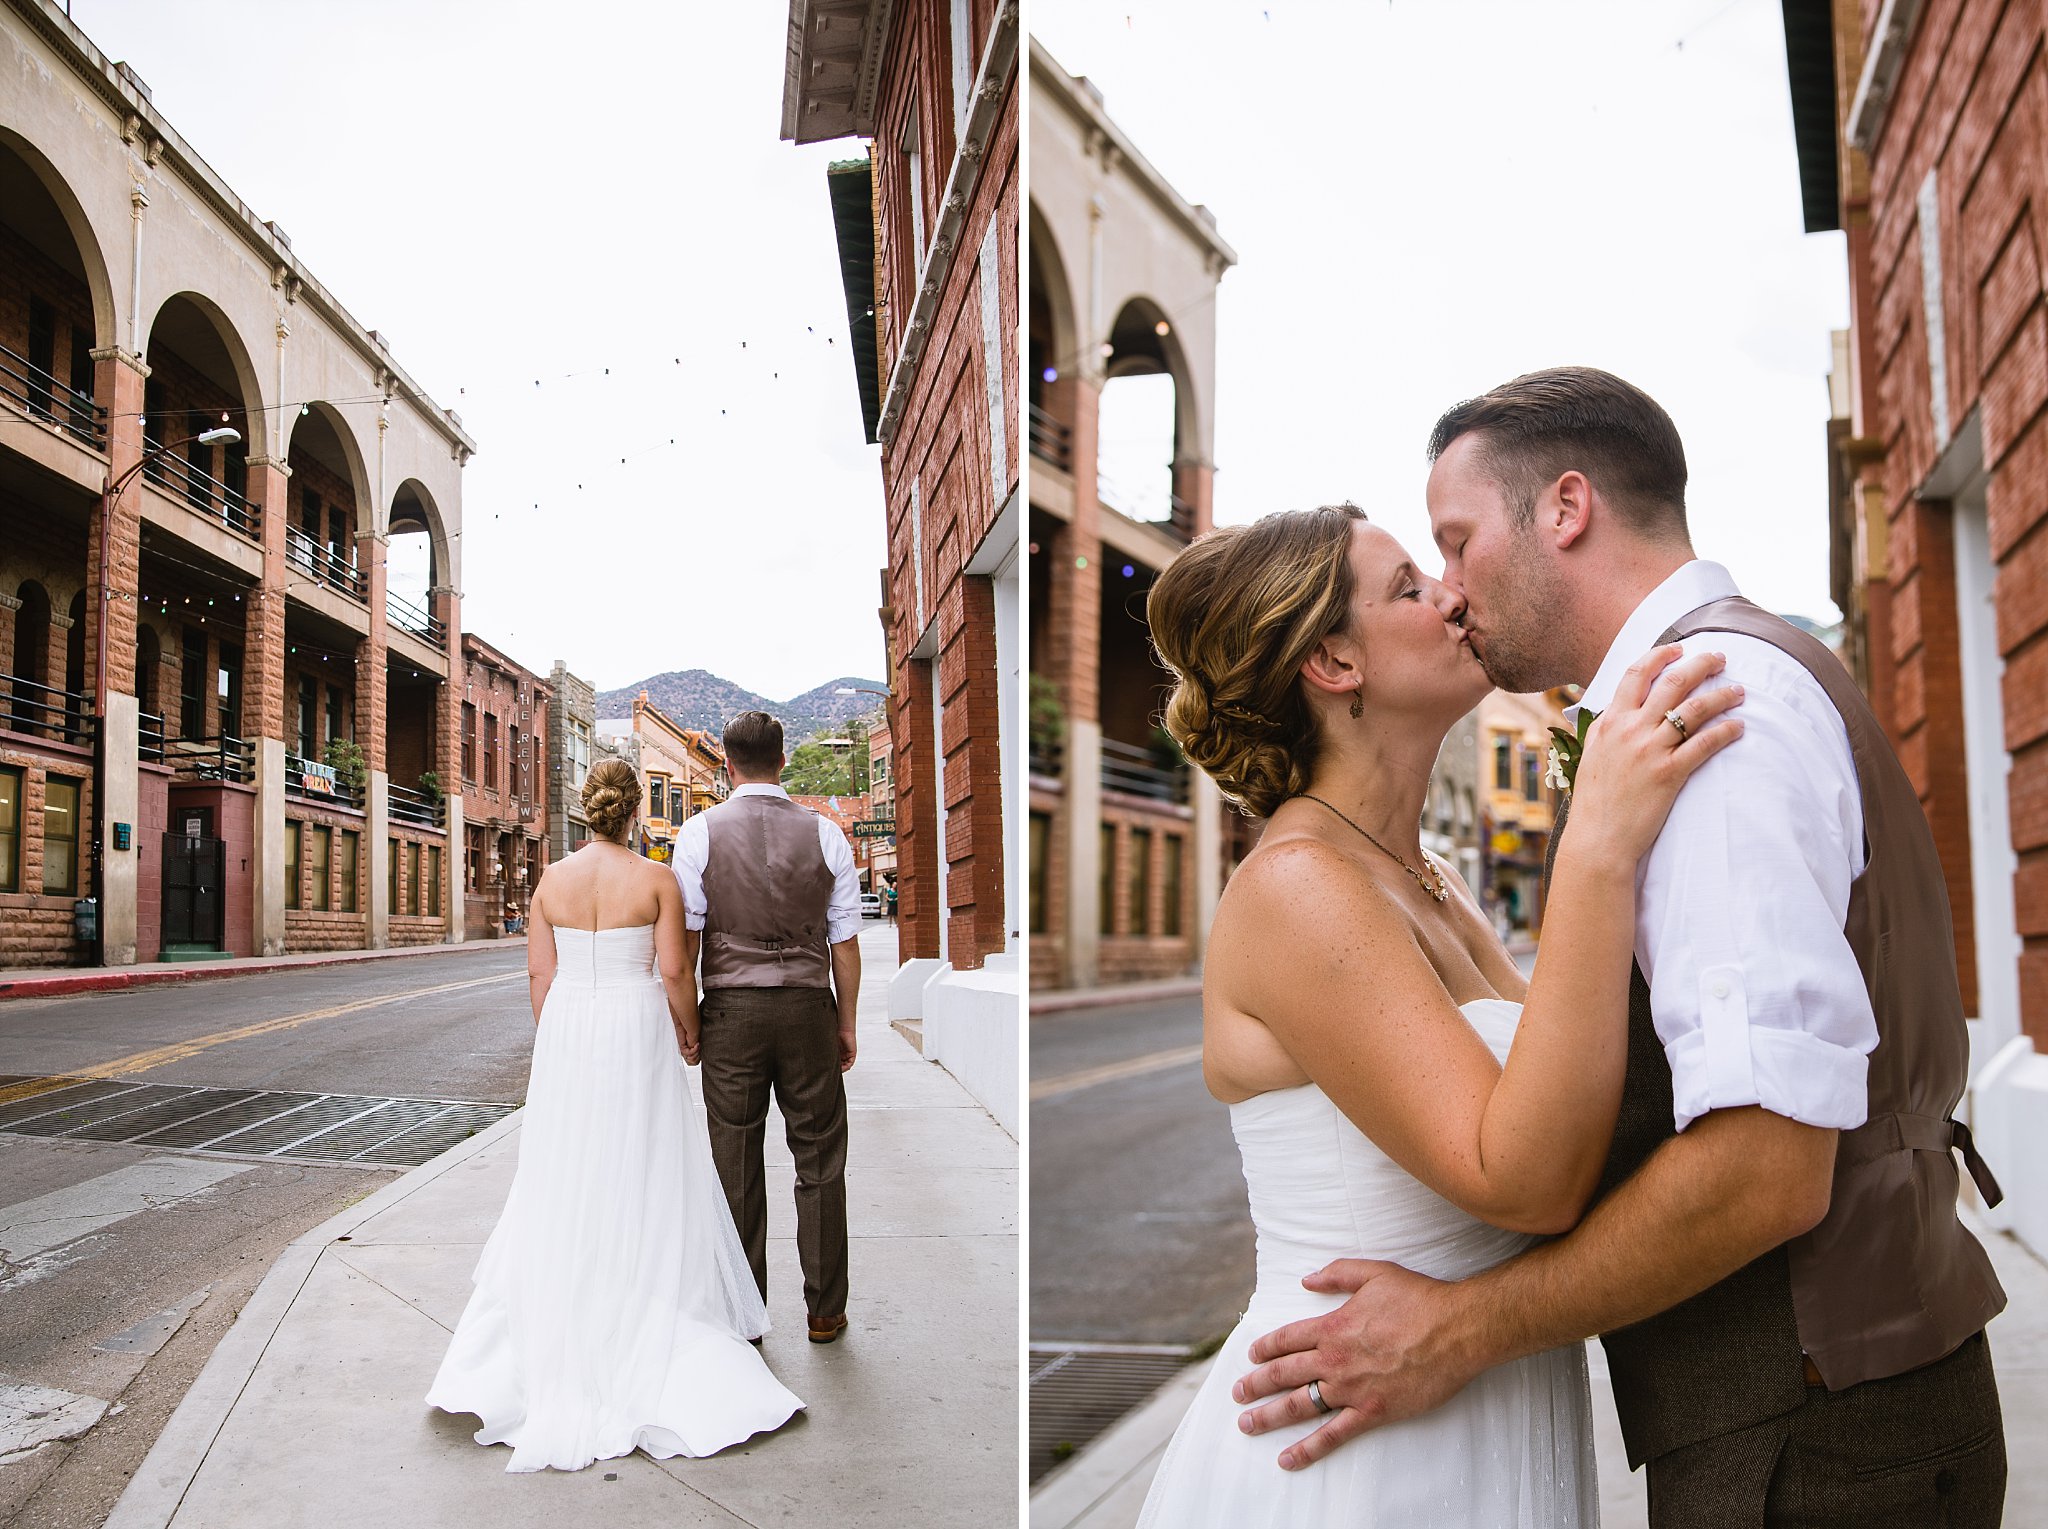 Bride and Groom at a historic Main Street in Bisbee Arizona by PMA Photography